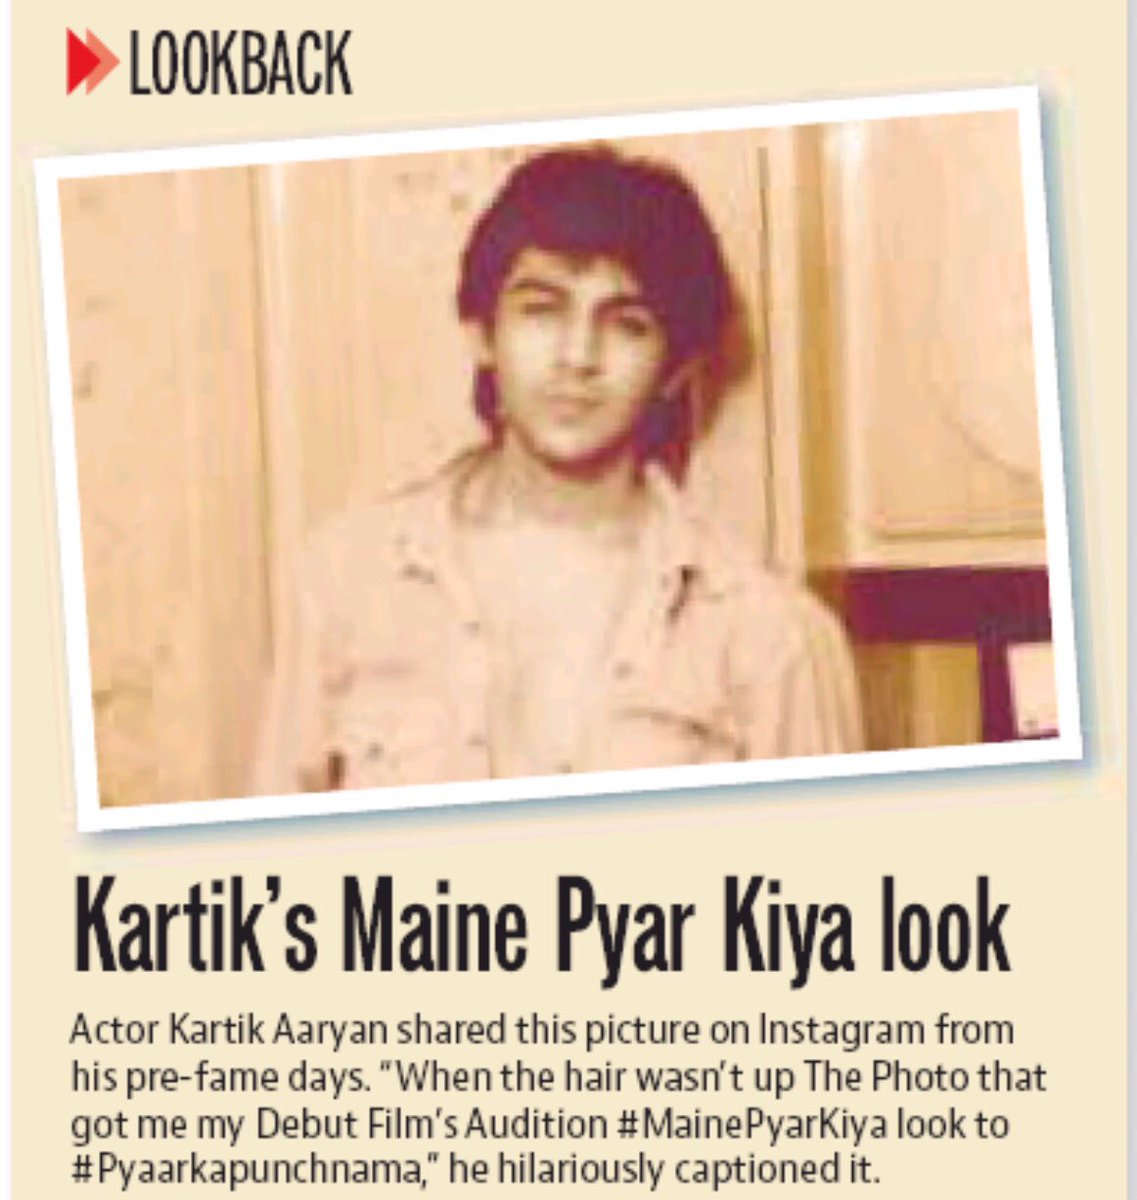 ★ Kartik’s Maine Pyar Kiya look ! tmblr.co/ZrXcGy2fSb6C7
#KartikAaryan shared this picture on IG from his pre-fame days. “When the hair wasn’t up The Photo that got me my Debut Film’s Audition #MainePyarKiya look to #Pyaarkapunchnama,” he hilariously captioned it.
#SalmanKhan